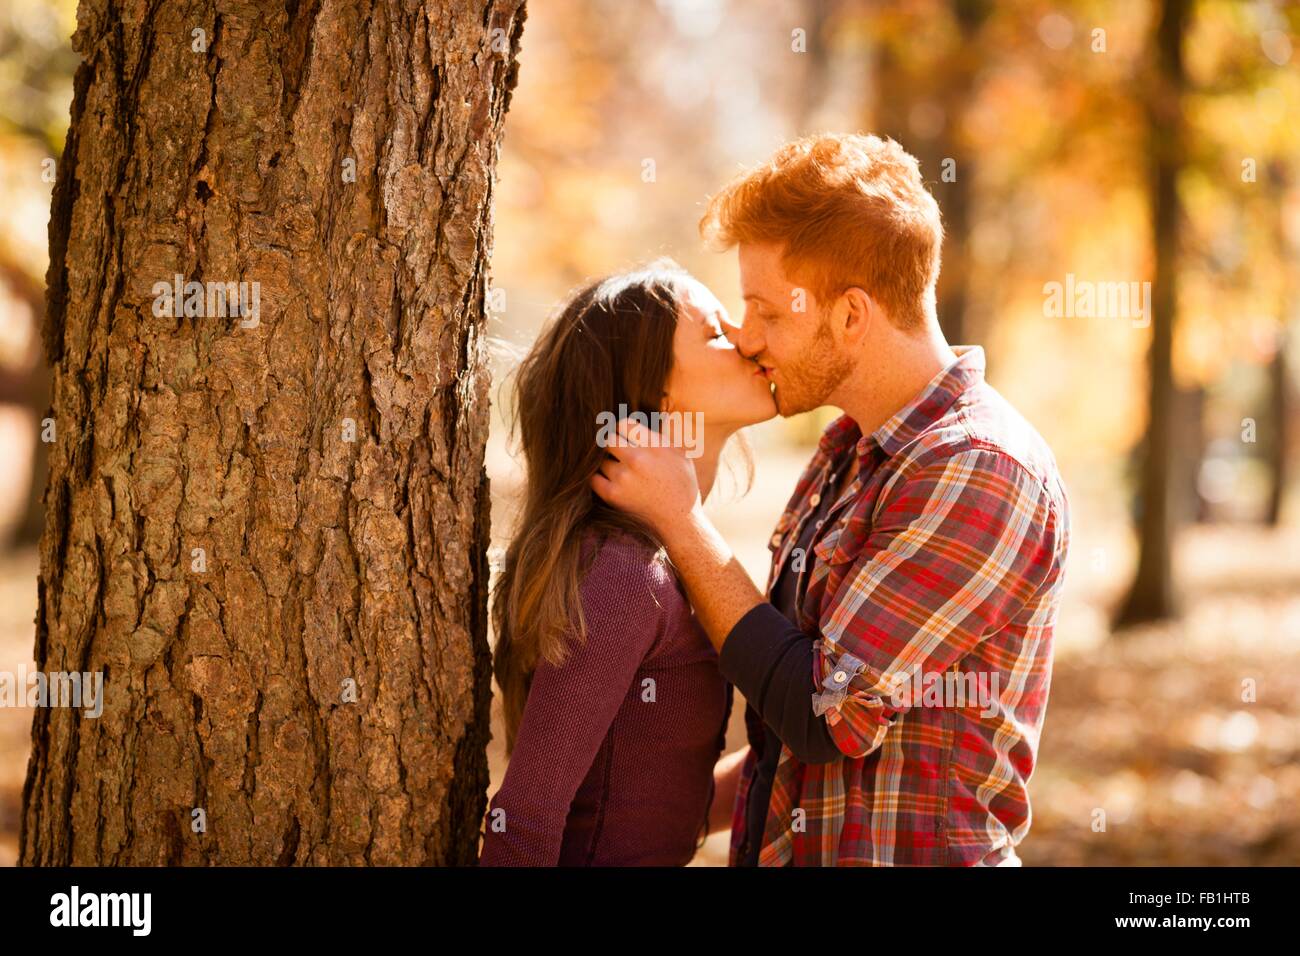 Romantic young couple kissing in autumn forest Stock Photo